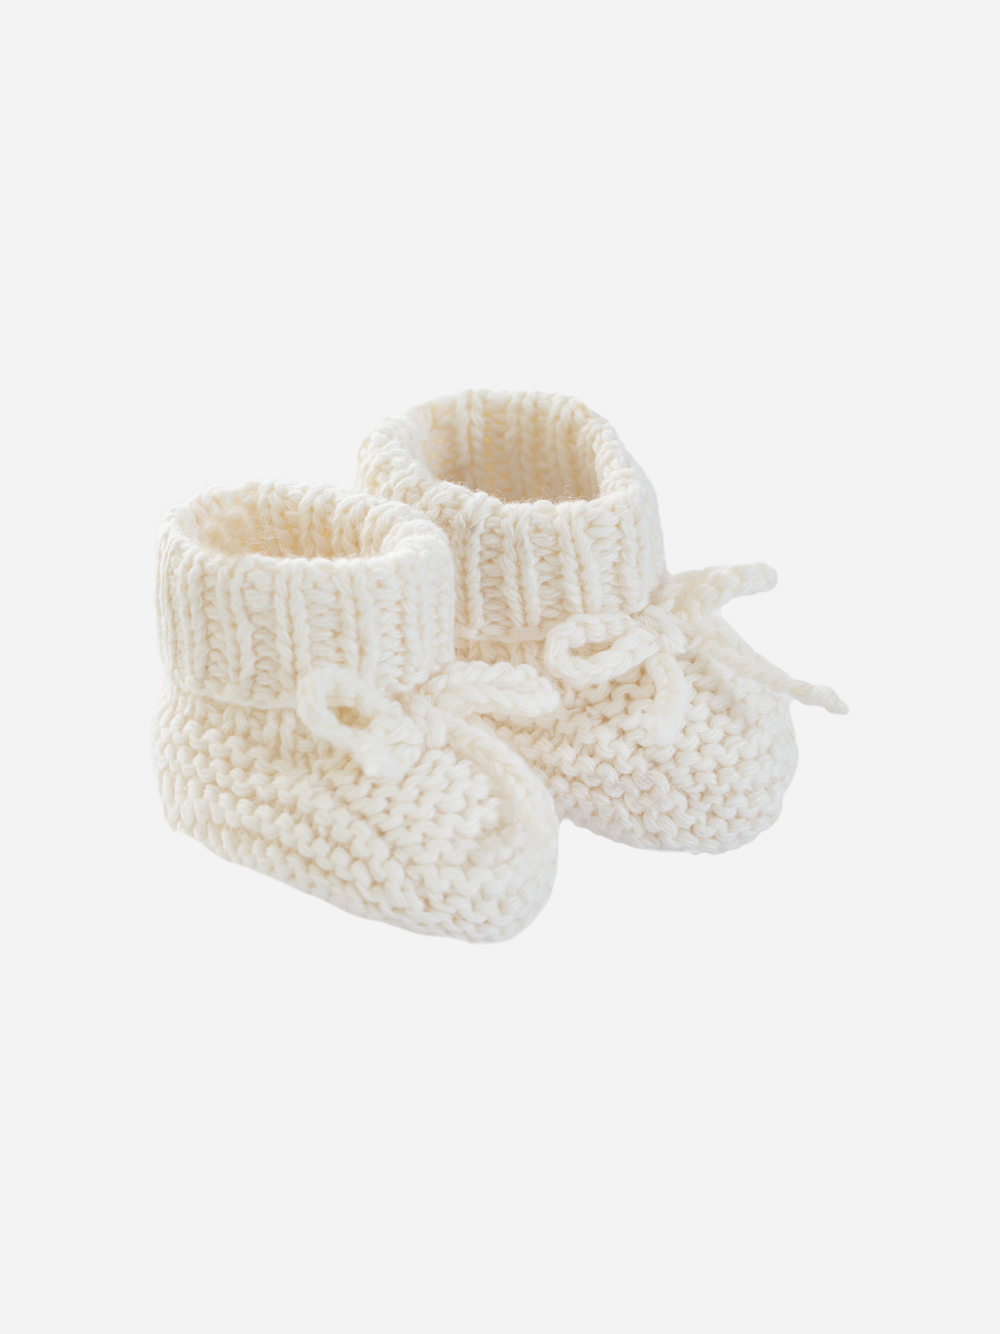 Girls booties in knit